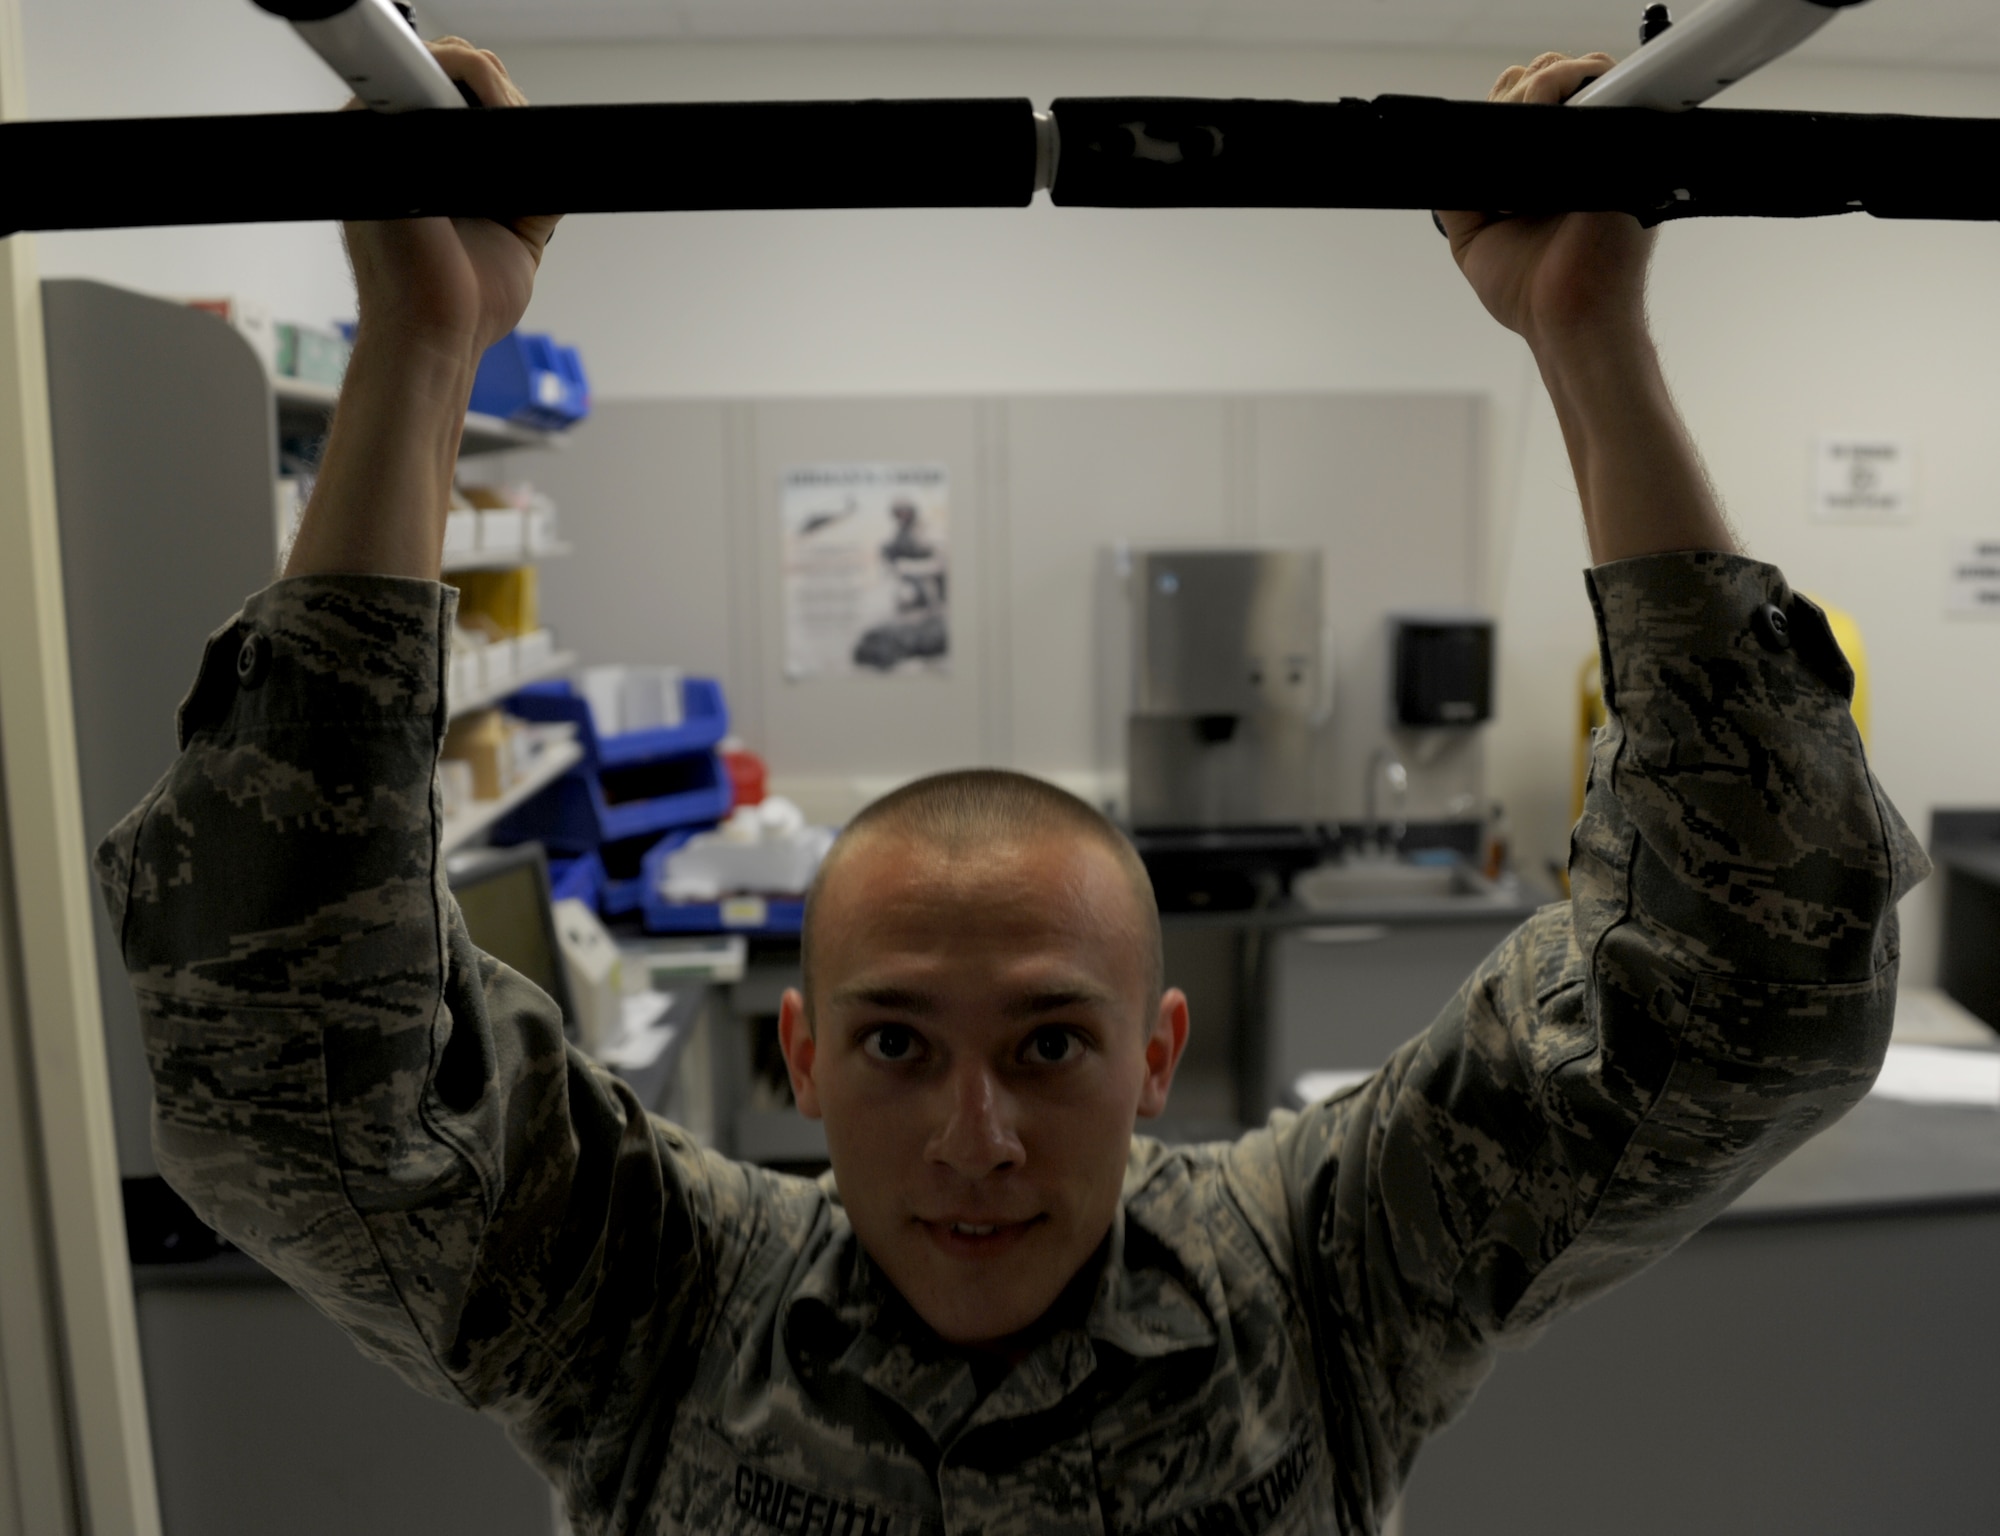 Senior Airman Ryan Griffith does a set of pull-ups on Maxwell Air Force Base, Nov. 6. Every hour, the 42nd Medical Group’s pharmacy flight gathers in a back room and does sets of pushups, sit-ups or pull-ups. (U.S. Air Force photo by Staff Sgt. Natasha Stannard)